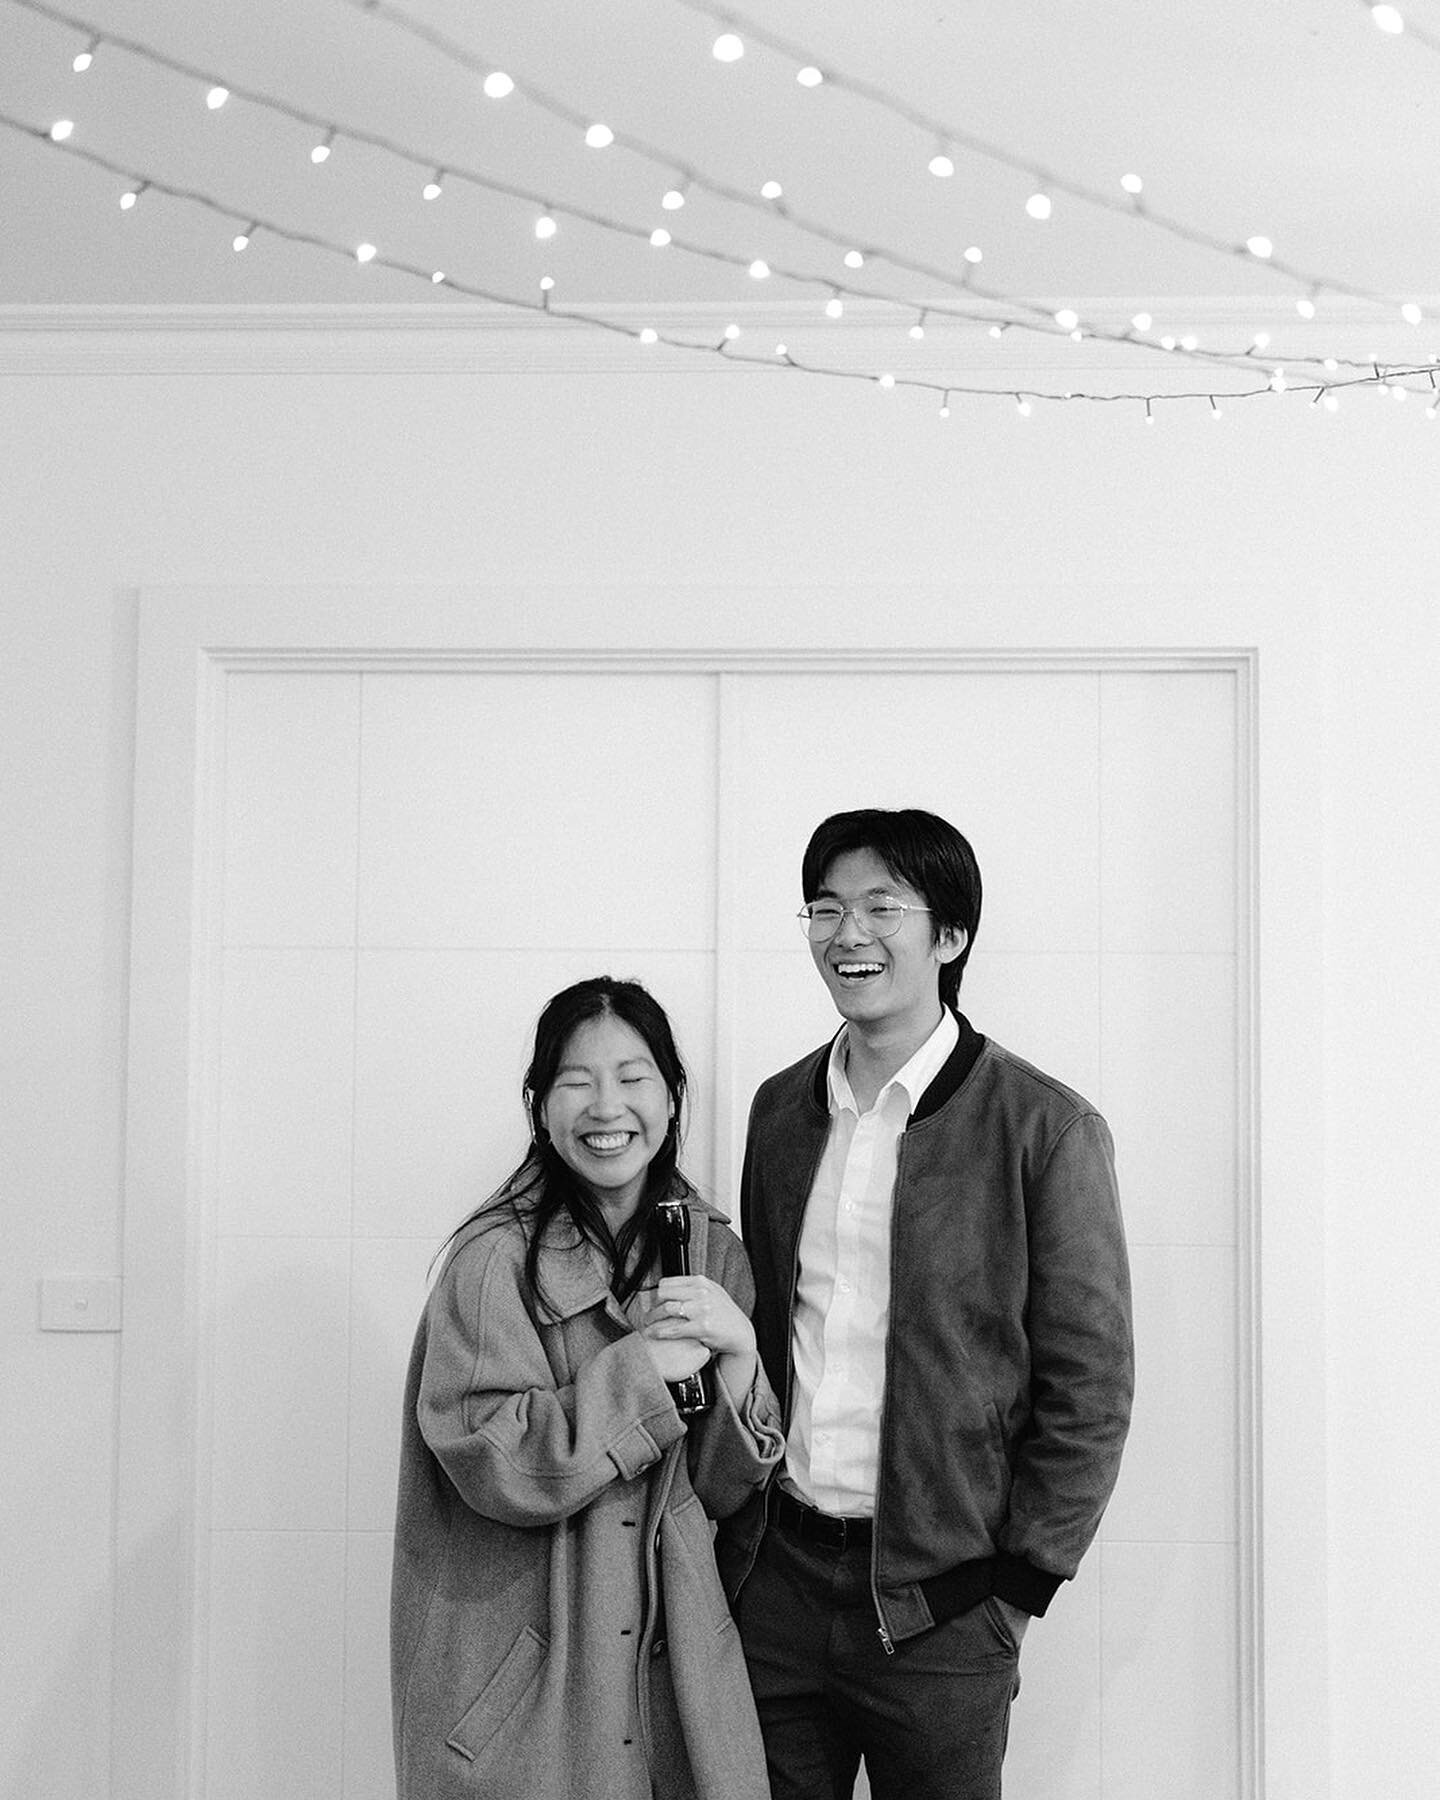 After popping the question, Elliot threw a magical surprise engagement party for @audrey_khor_ . We are so happy for the both of you 💛

As mentioned by your folks on the night, relationships are the most important thing in the world and there are so